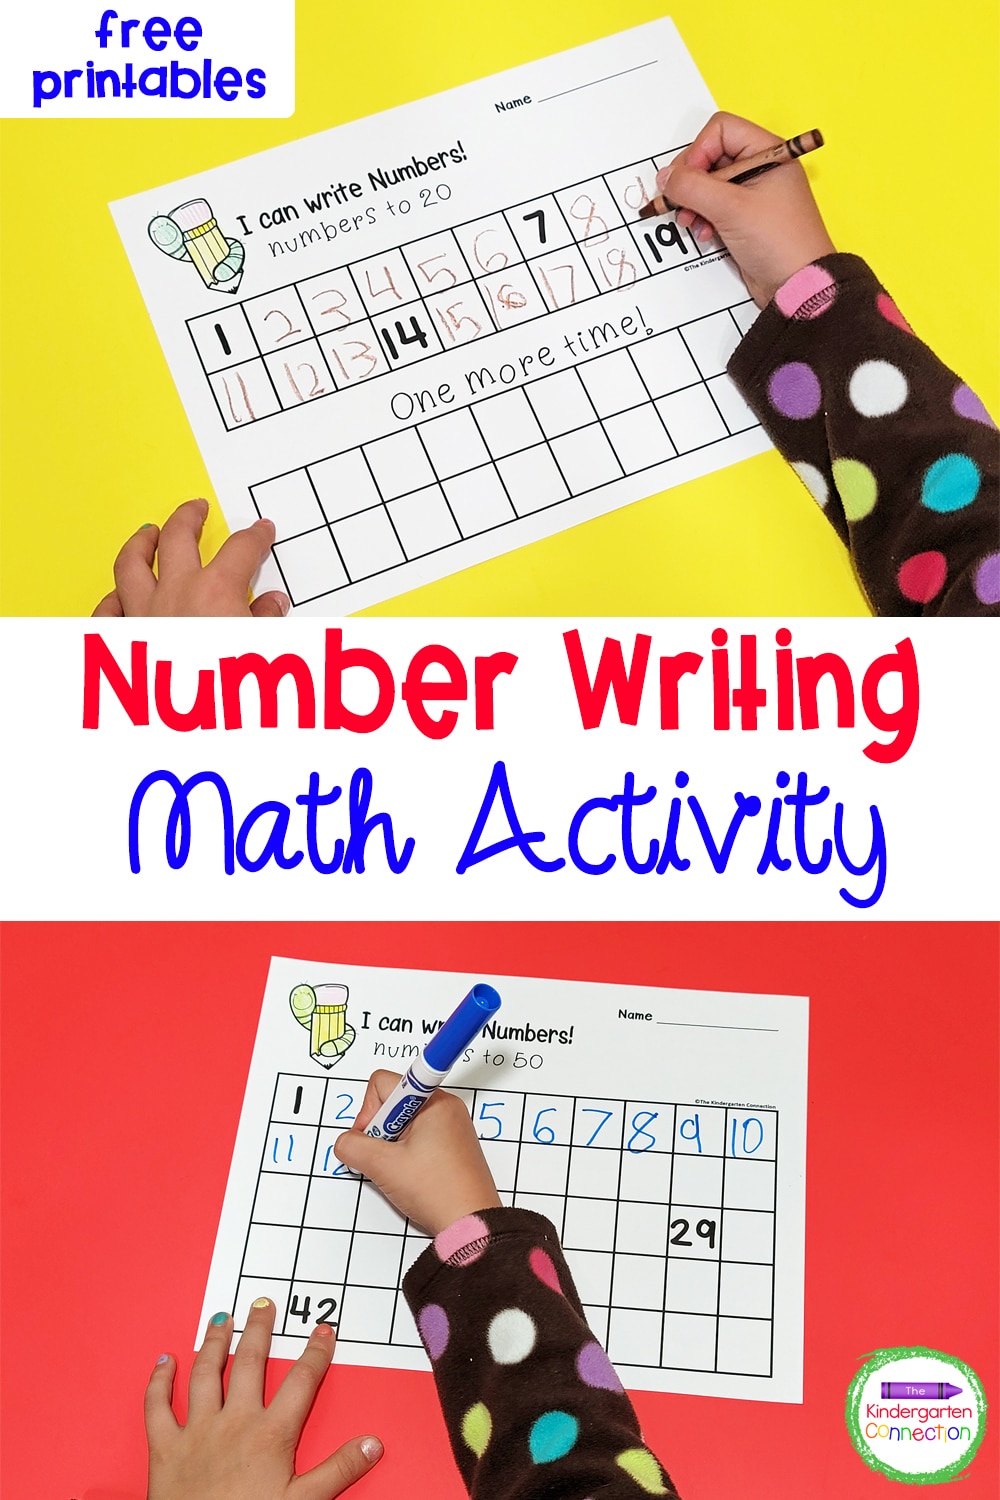 Use these free Number Writing Printables as an easy-prep morning work activity or math center option for fun number writing practice to 100!